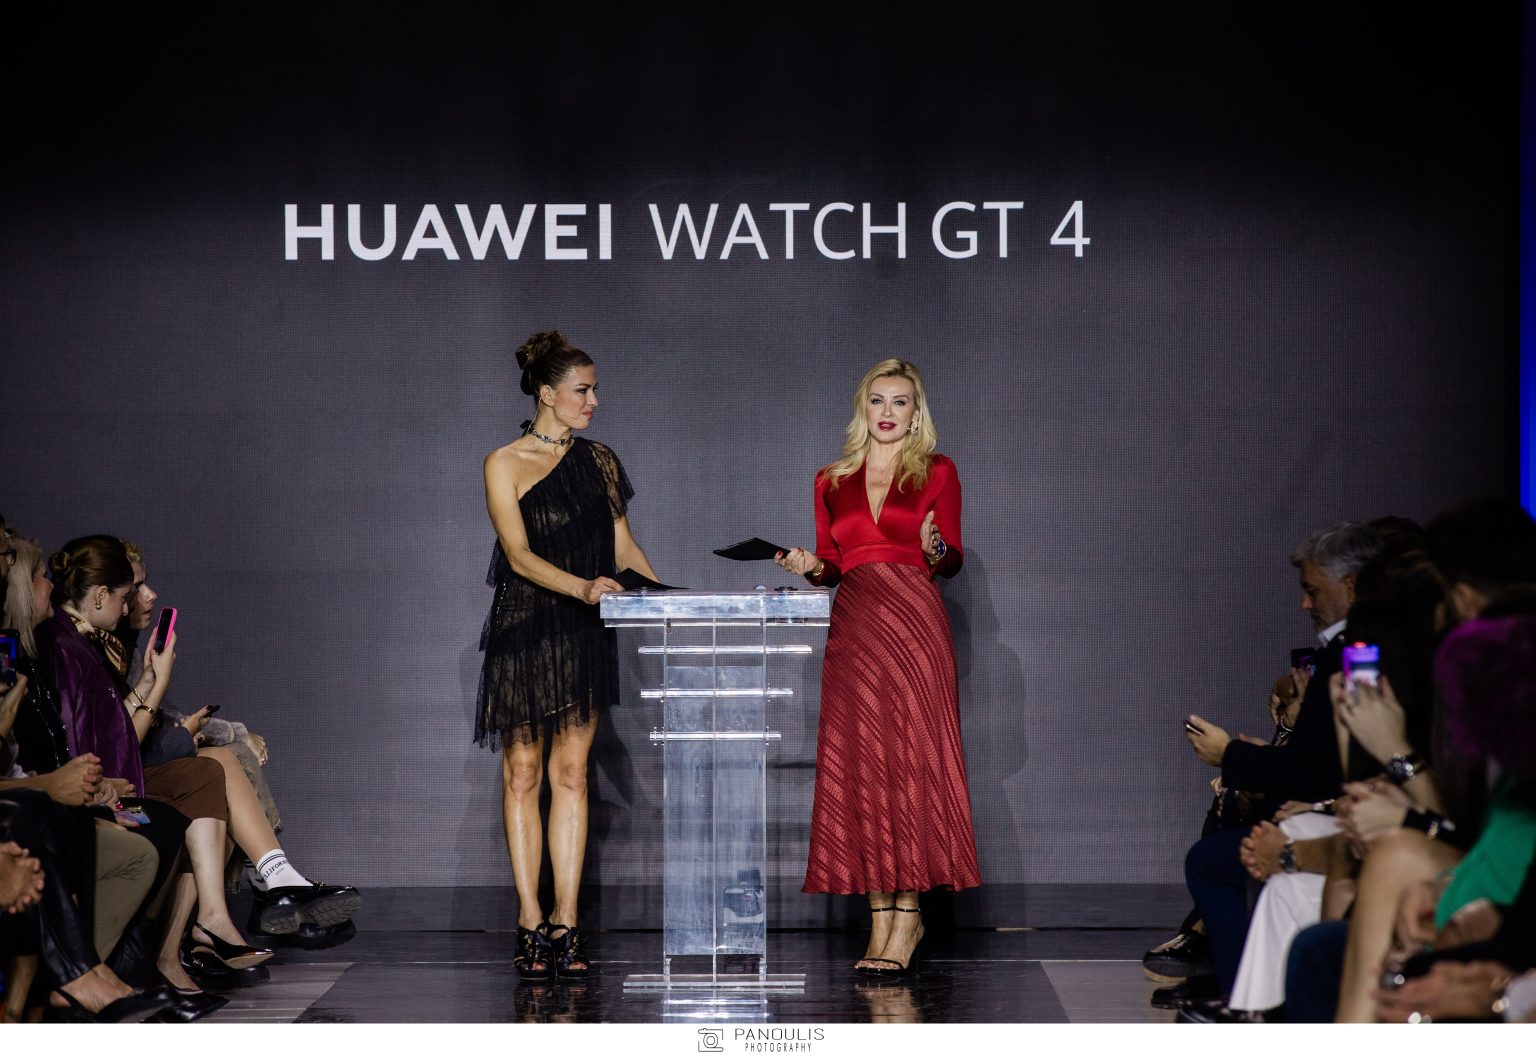 NEW DESIGNERS AWARDS BY HUAWEI GT4